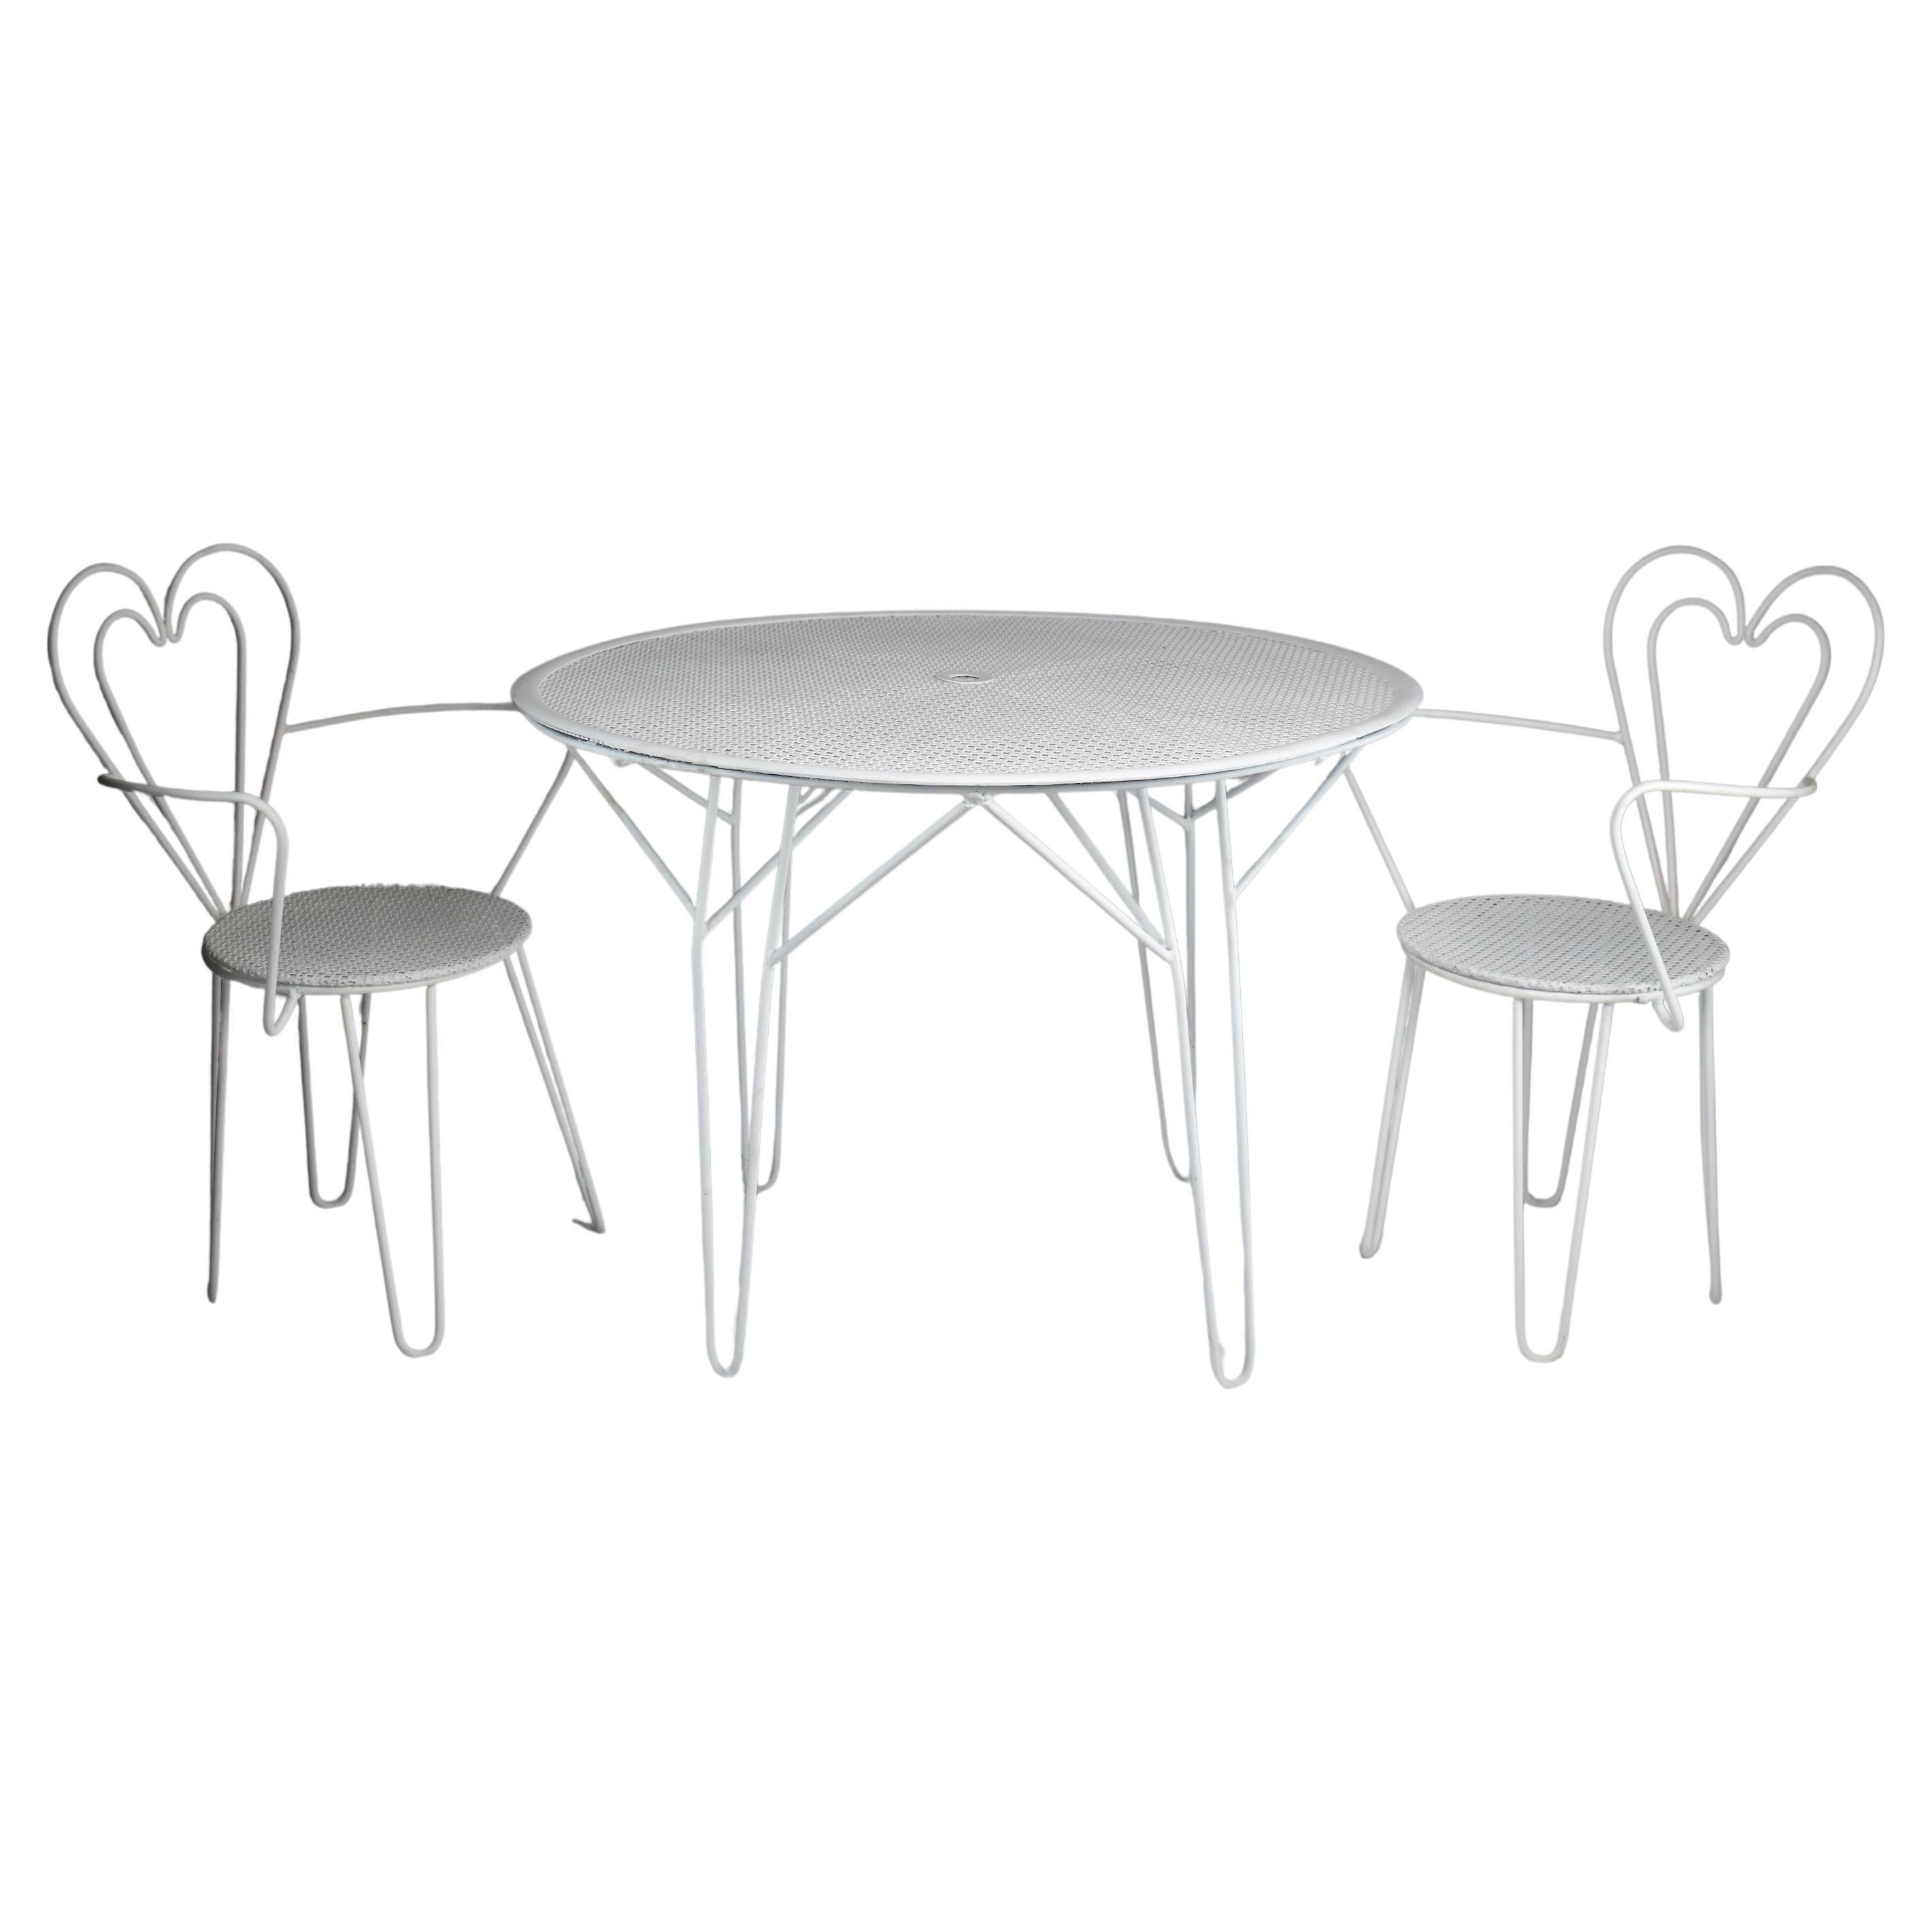 1950's French Mid-Century Mathieu Mategot Garden Table and Heart Chairs